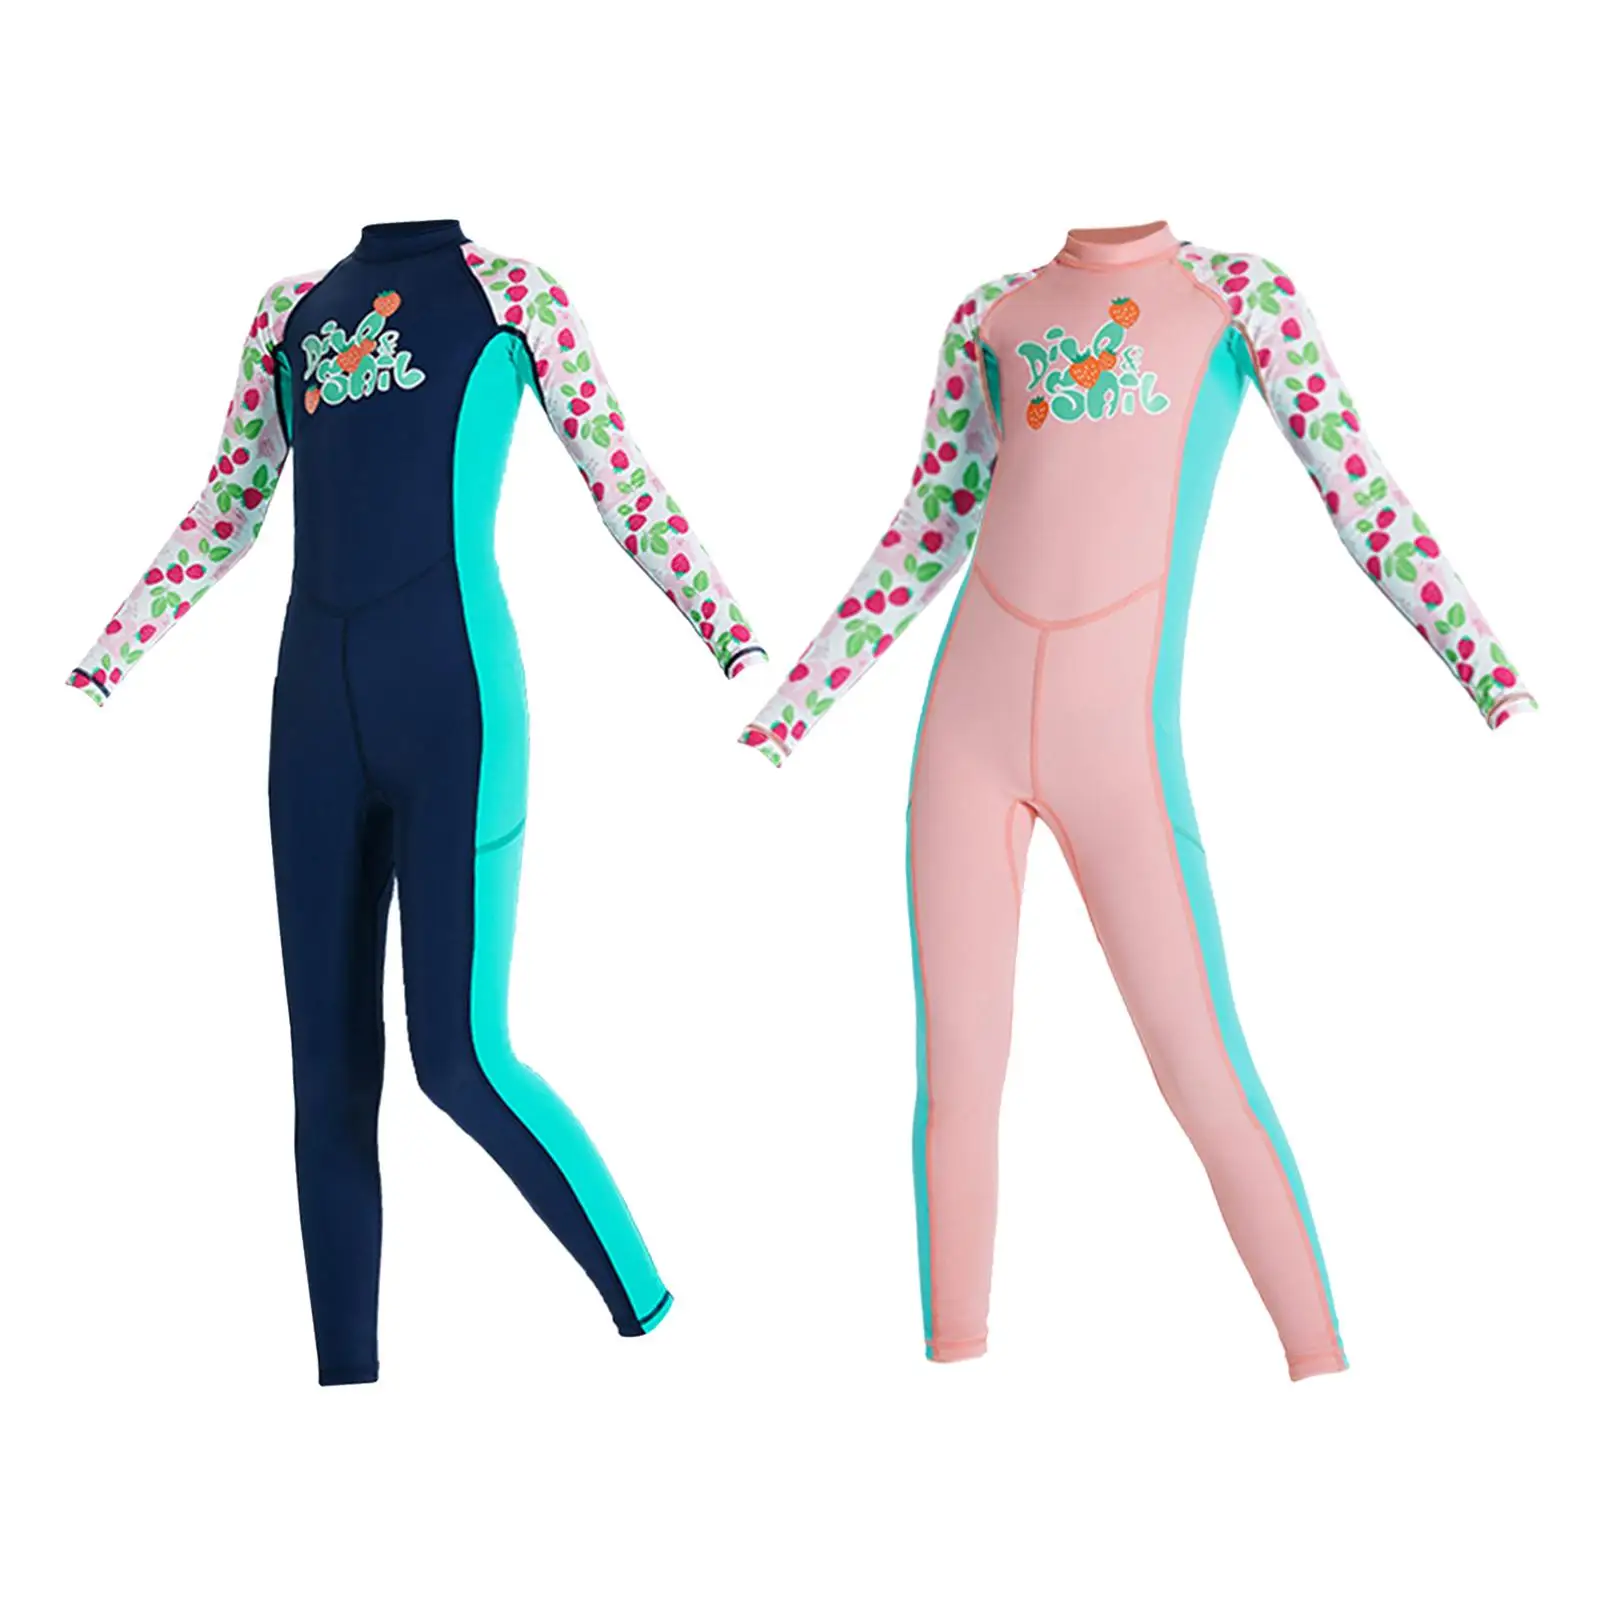 

Thermal Full suits Diving Swimsuits Scratch Resistant Clothes Surfing Kids Wetsuit for Boating Kayaking Canoeing Swim Summer